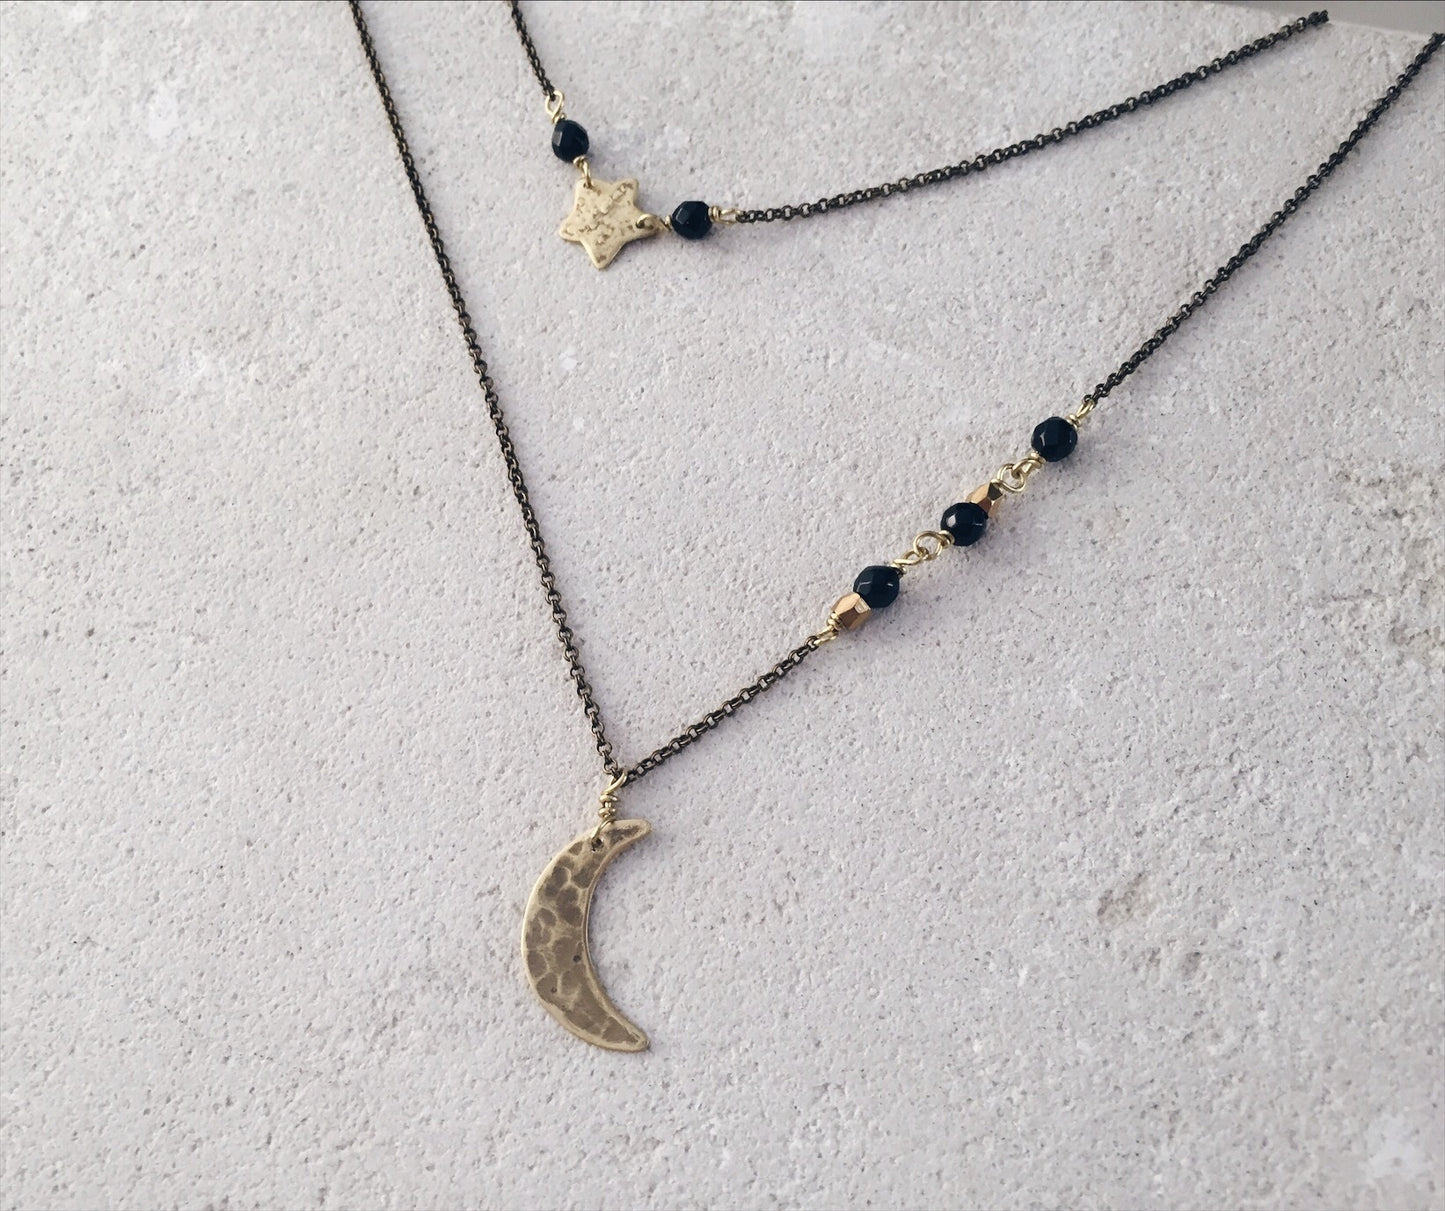 CLEARANCE Shooting Star Double Chain Necklace with Black Onyx